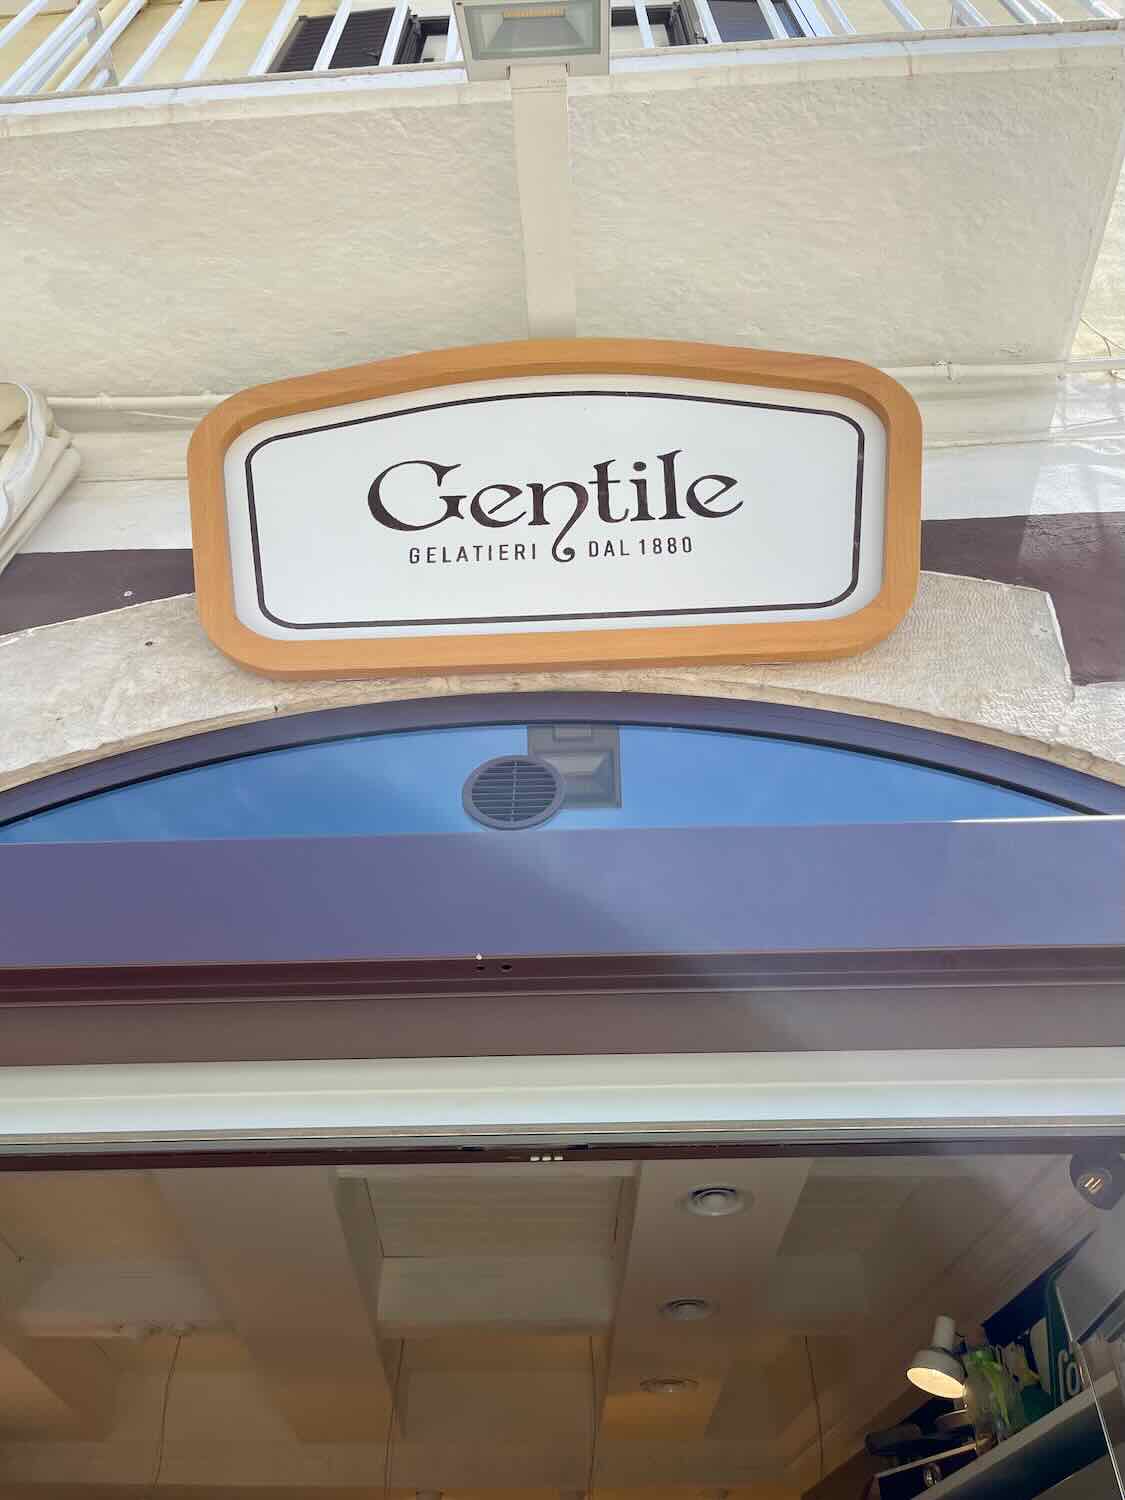 The sign for Gentile Gelateria in Bari, Italy, established in 1880. The sign is mounted above the entrance of the shop, featuring a simple and elegant design.